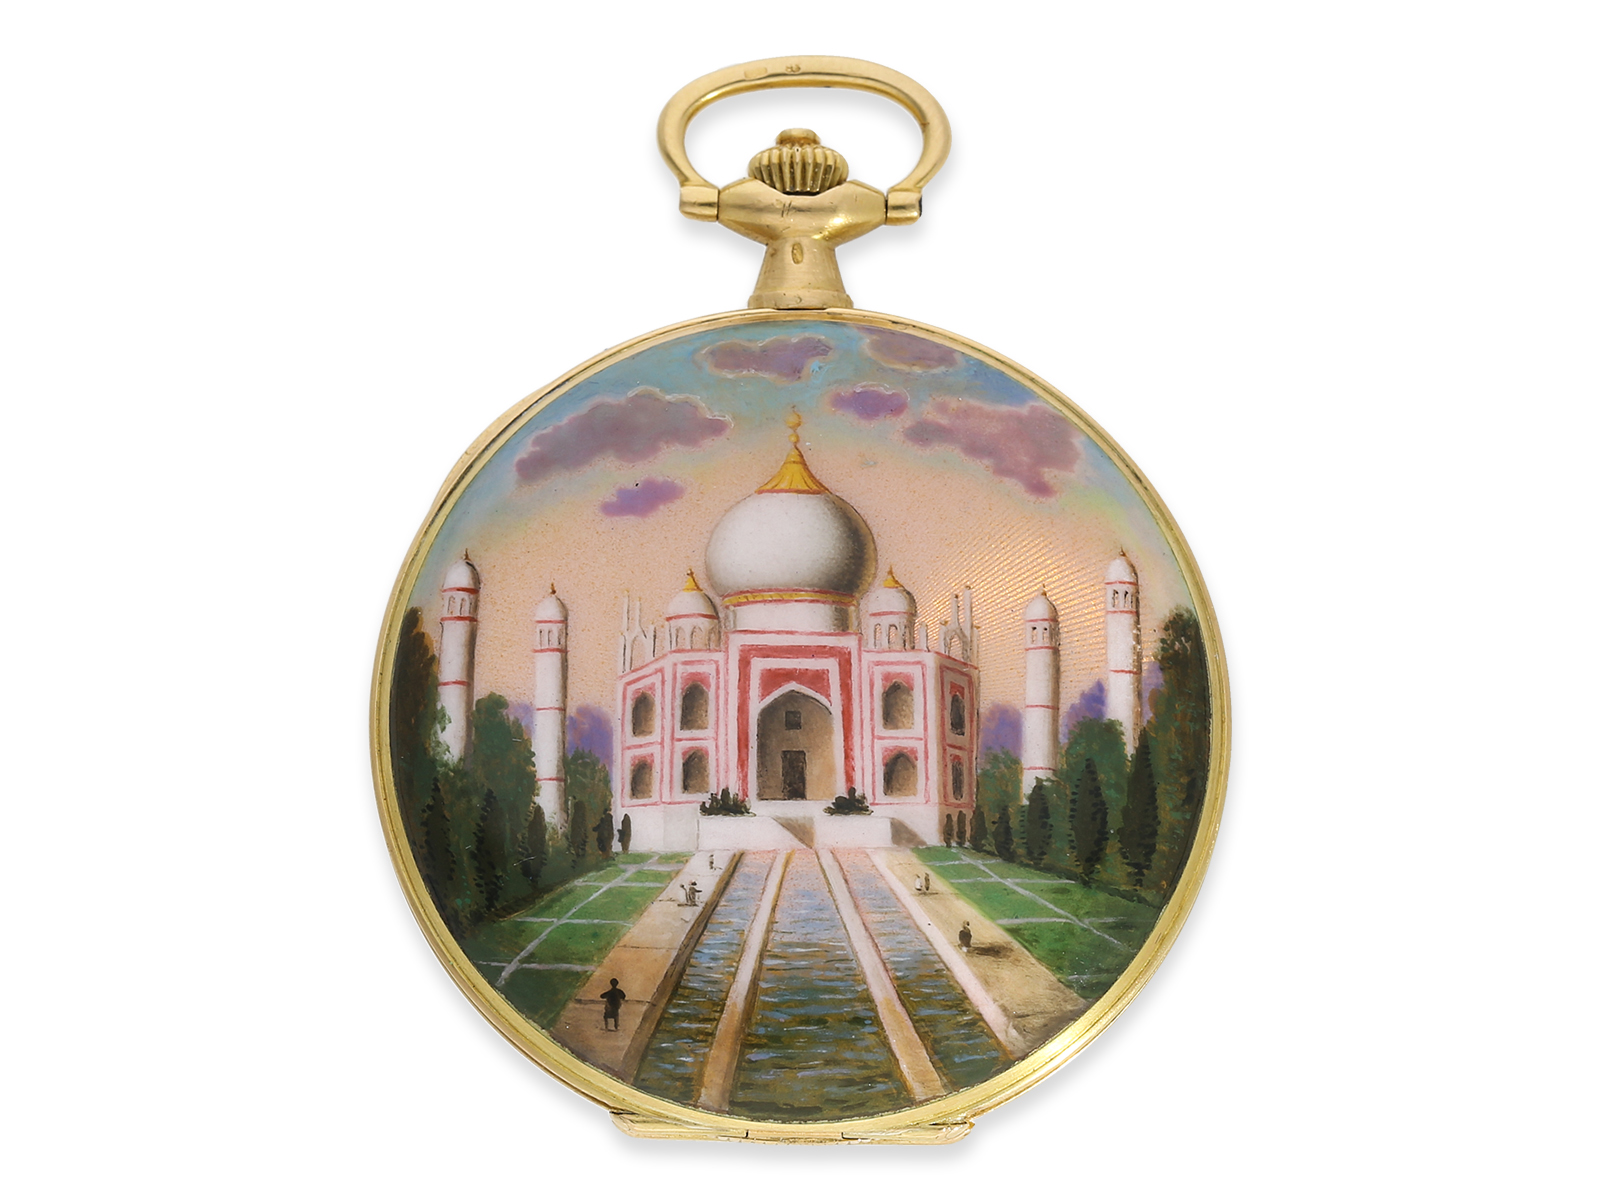 Pocket watch: extremely rare gold/enamel hunting case watch for the Indian market with representatio